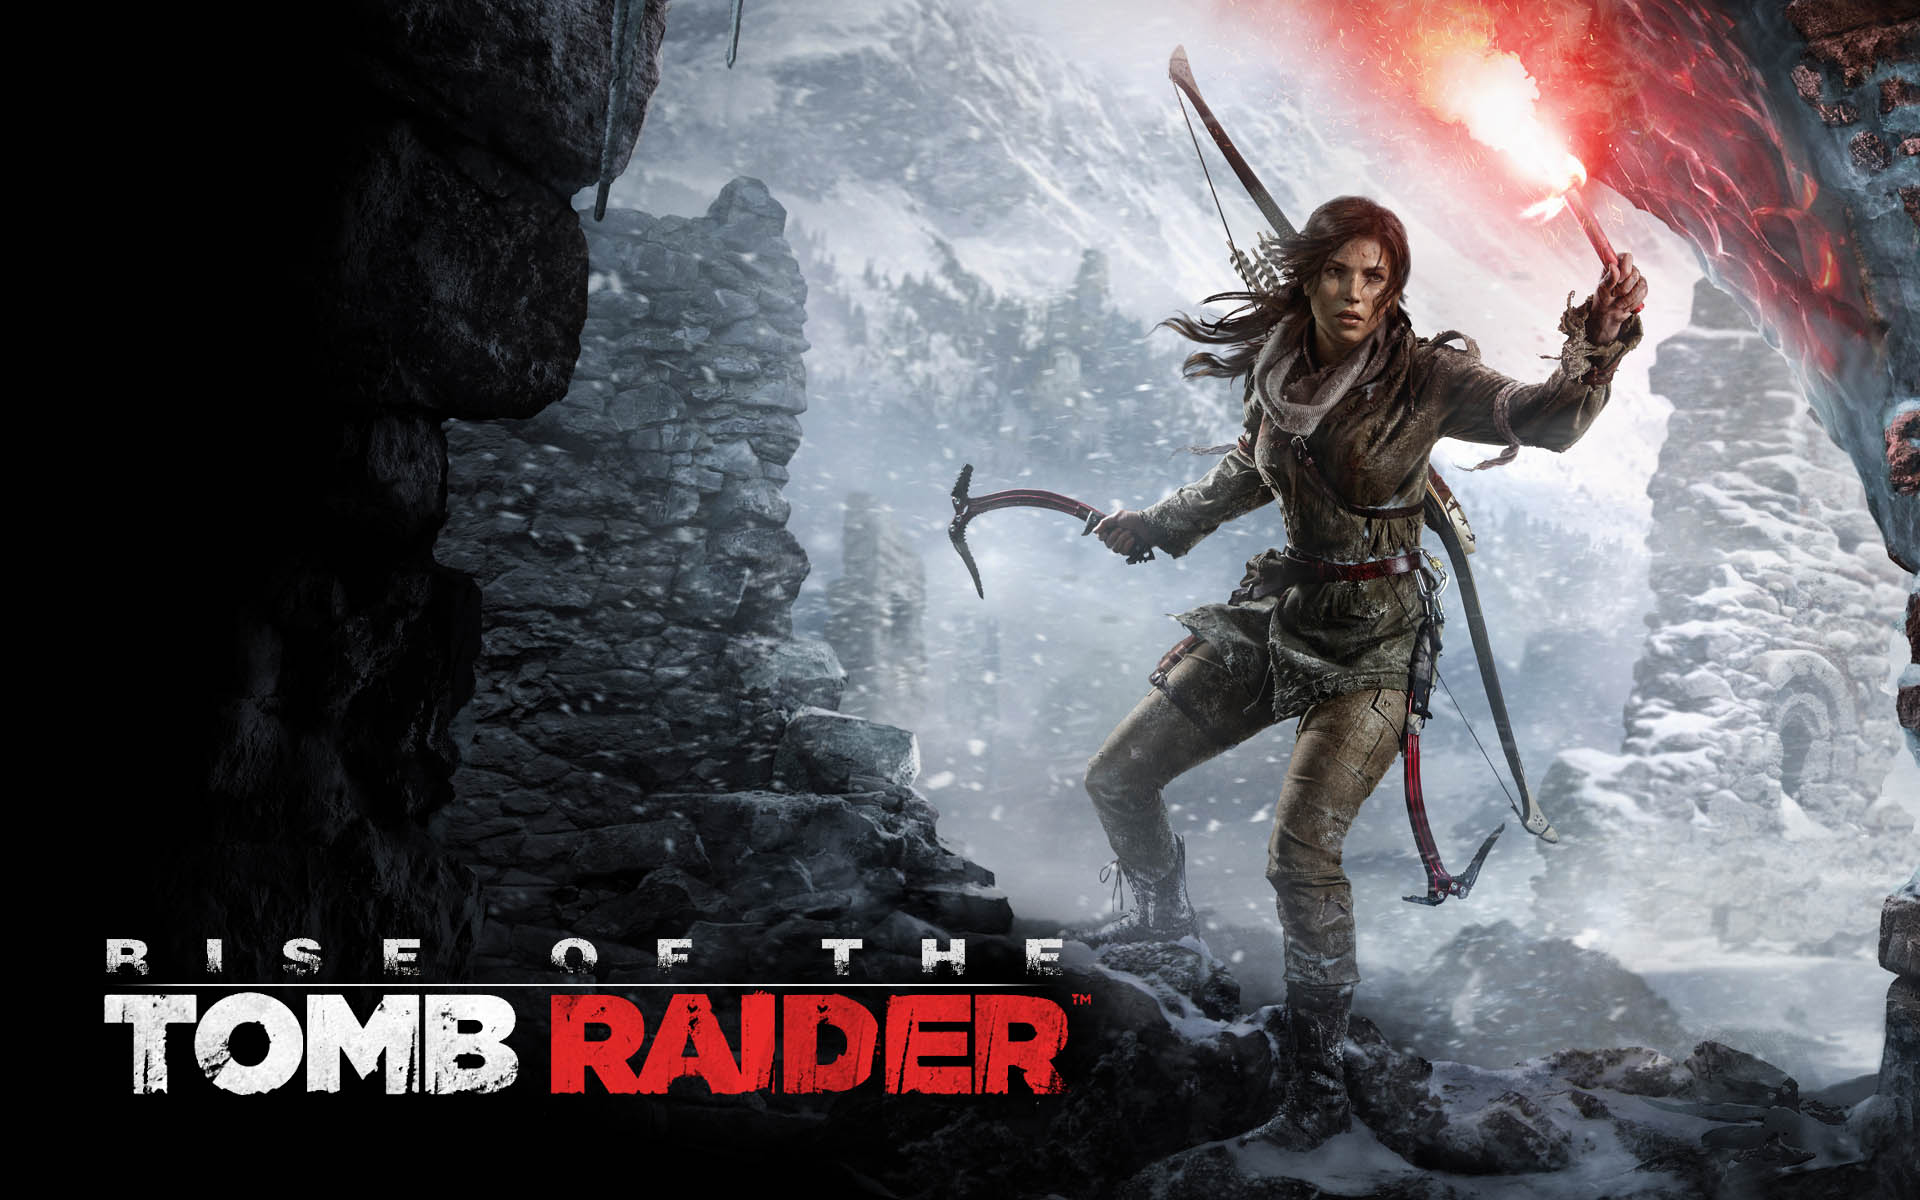 rise of the tomb raider AMD RYZEN 7 2700X PROCESSOR REVIEW